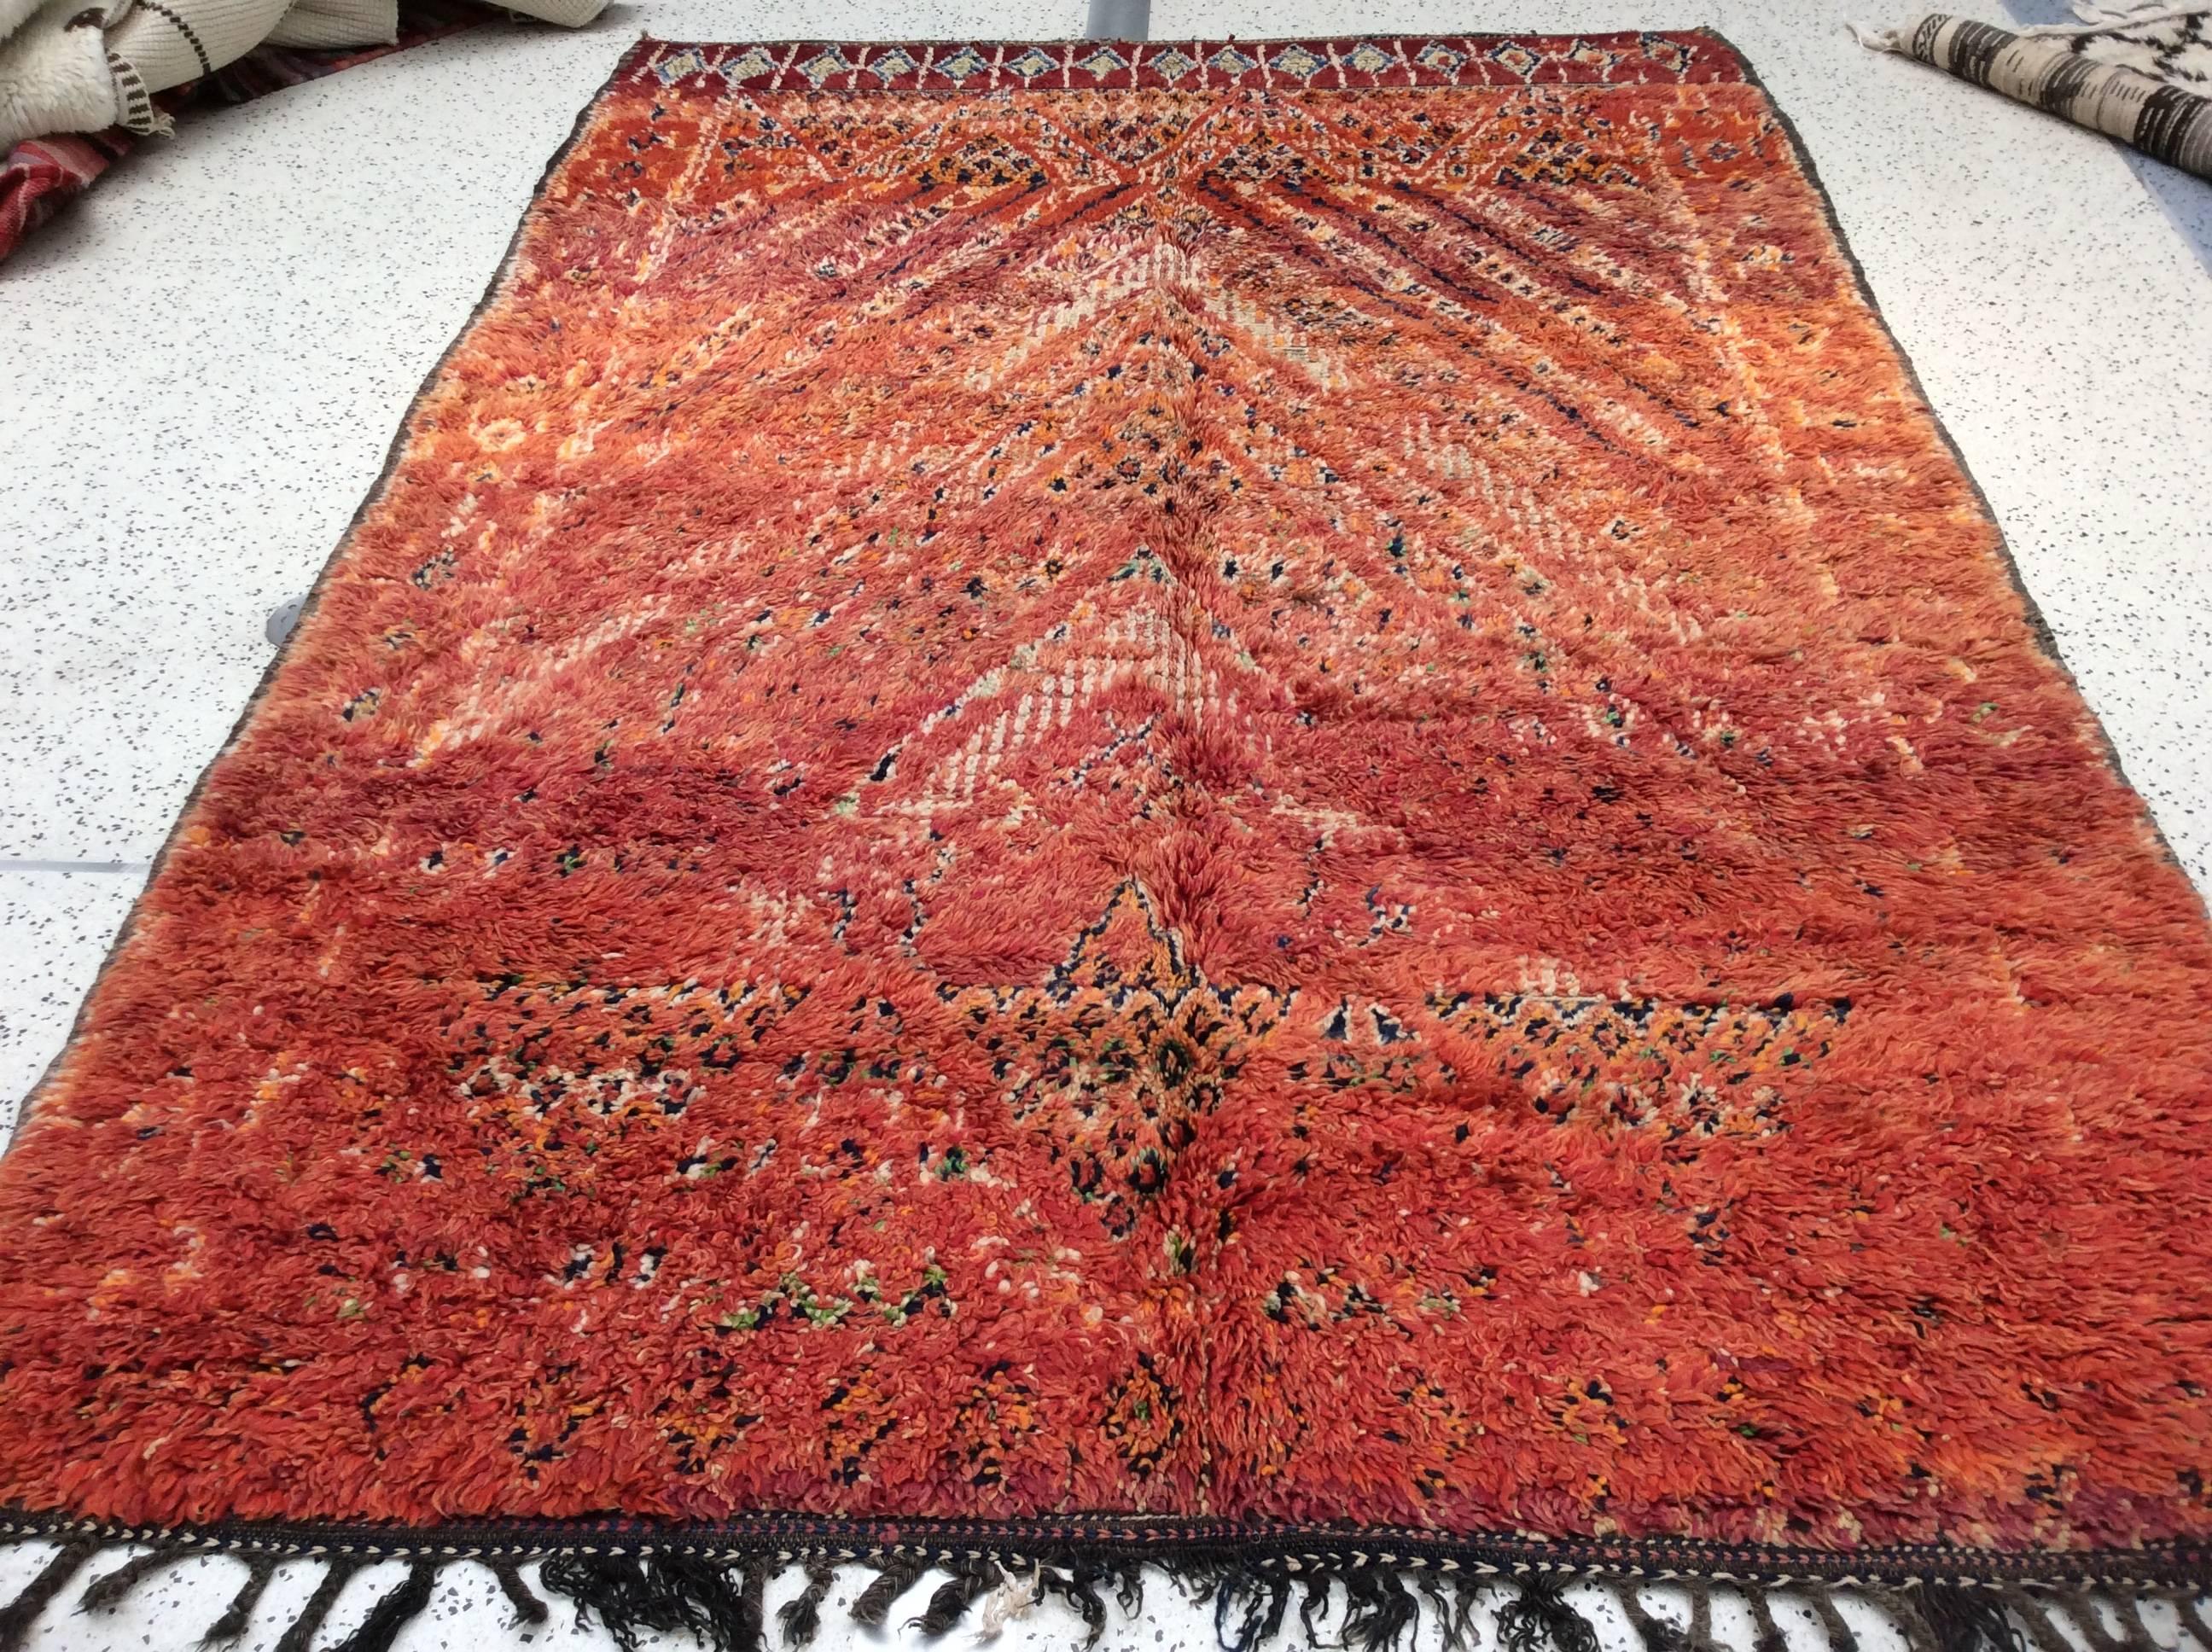 Red Moroccan rug.